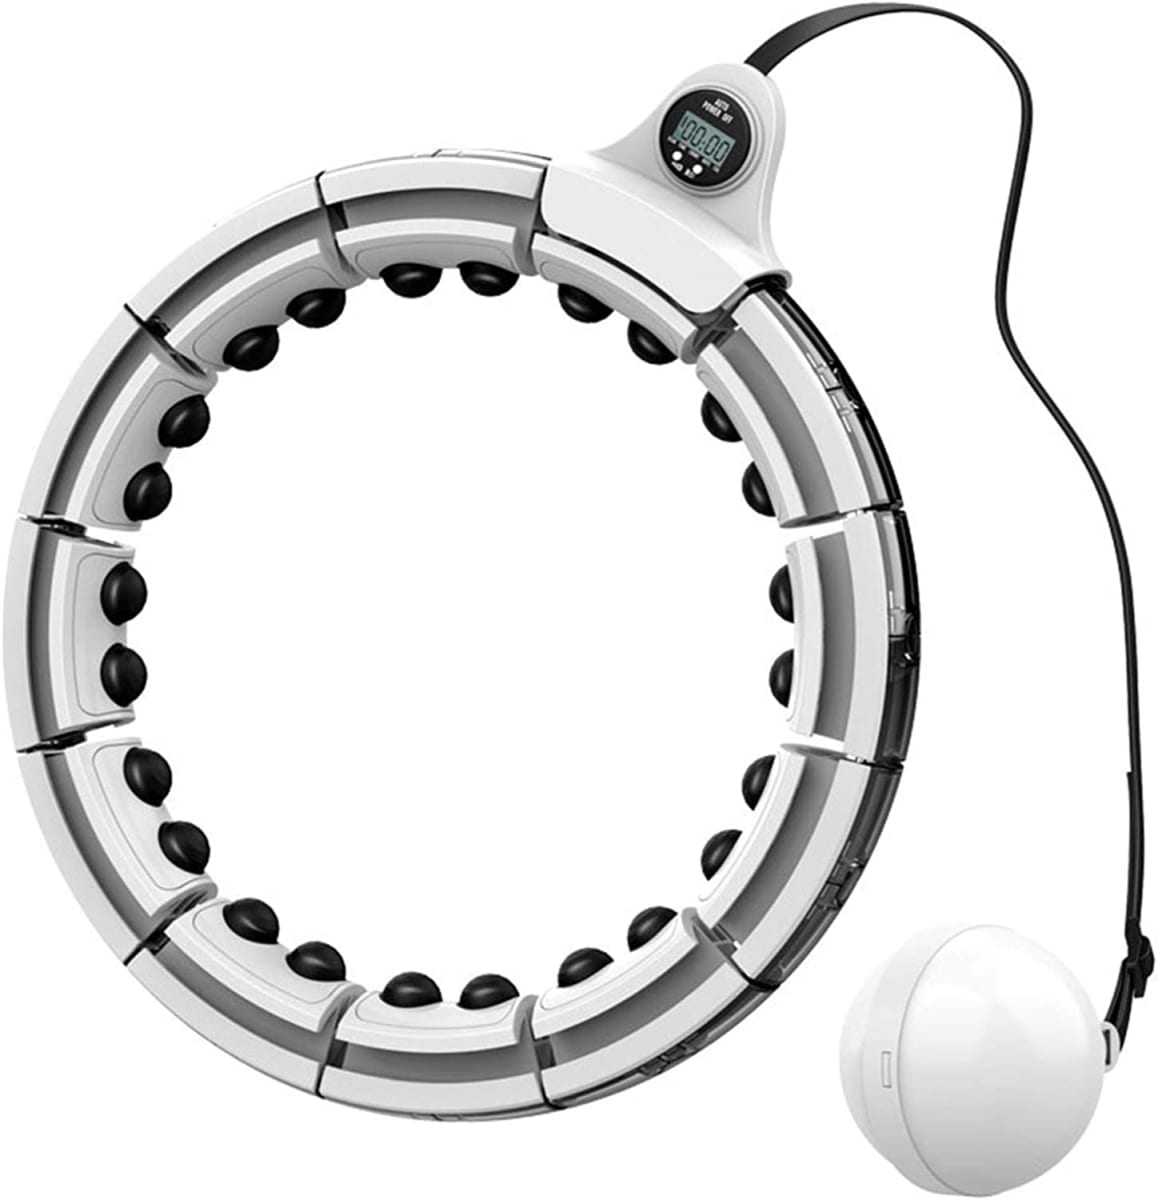 ZDXY Magnetic Therapy Weighted Hula Hoop